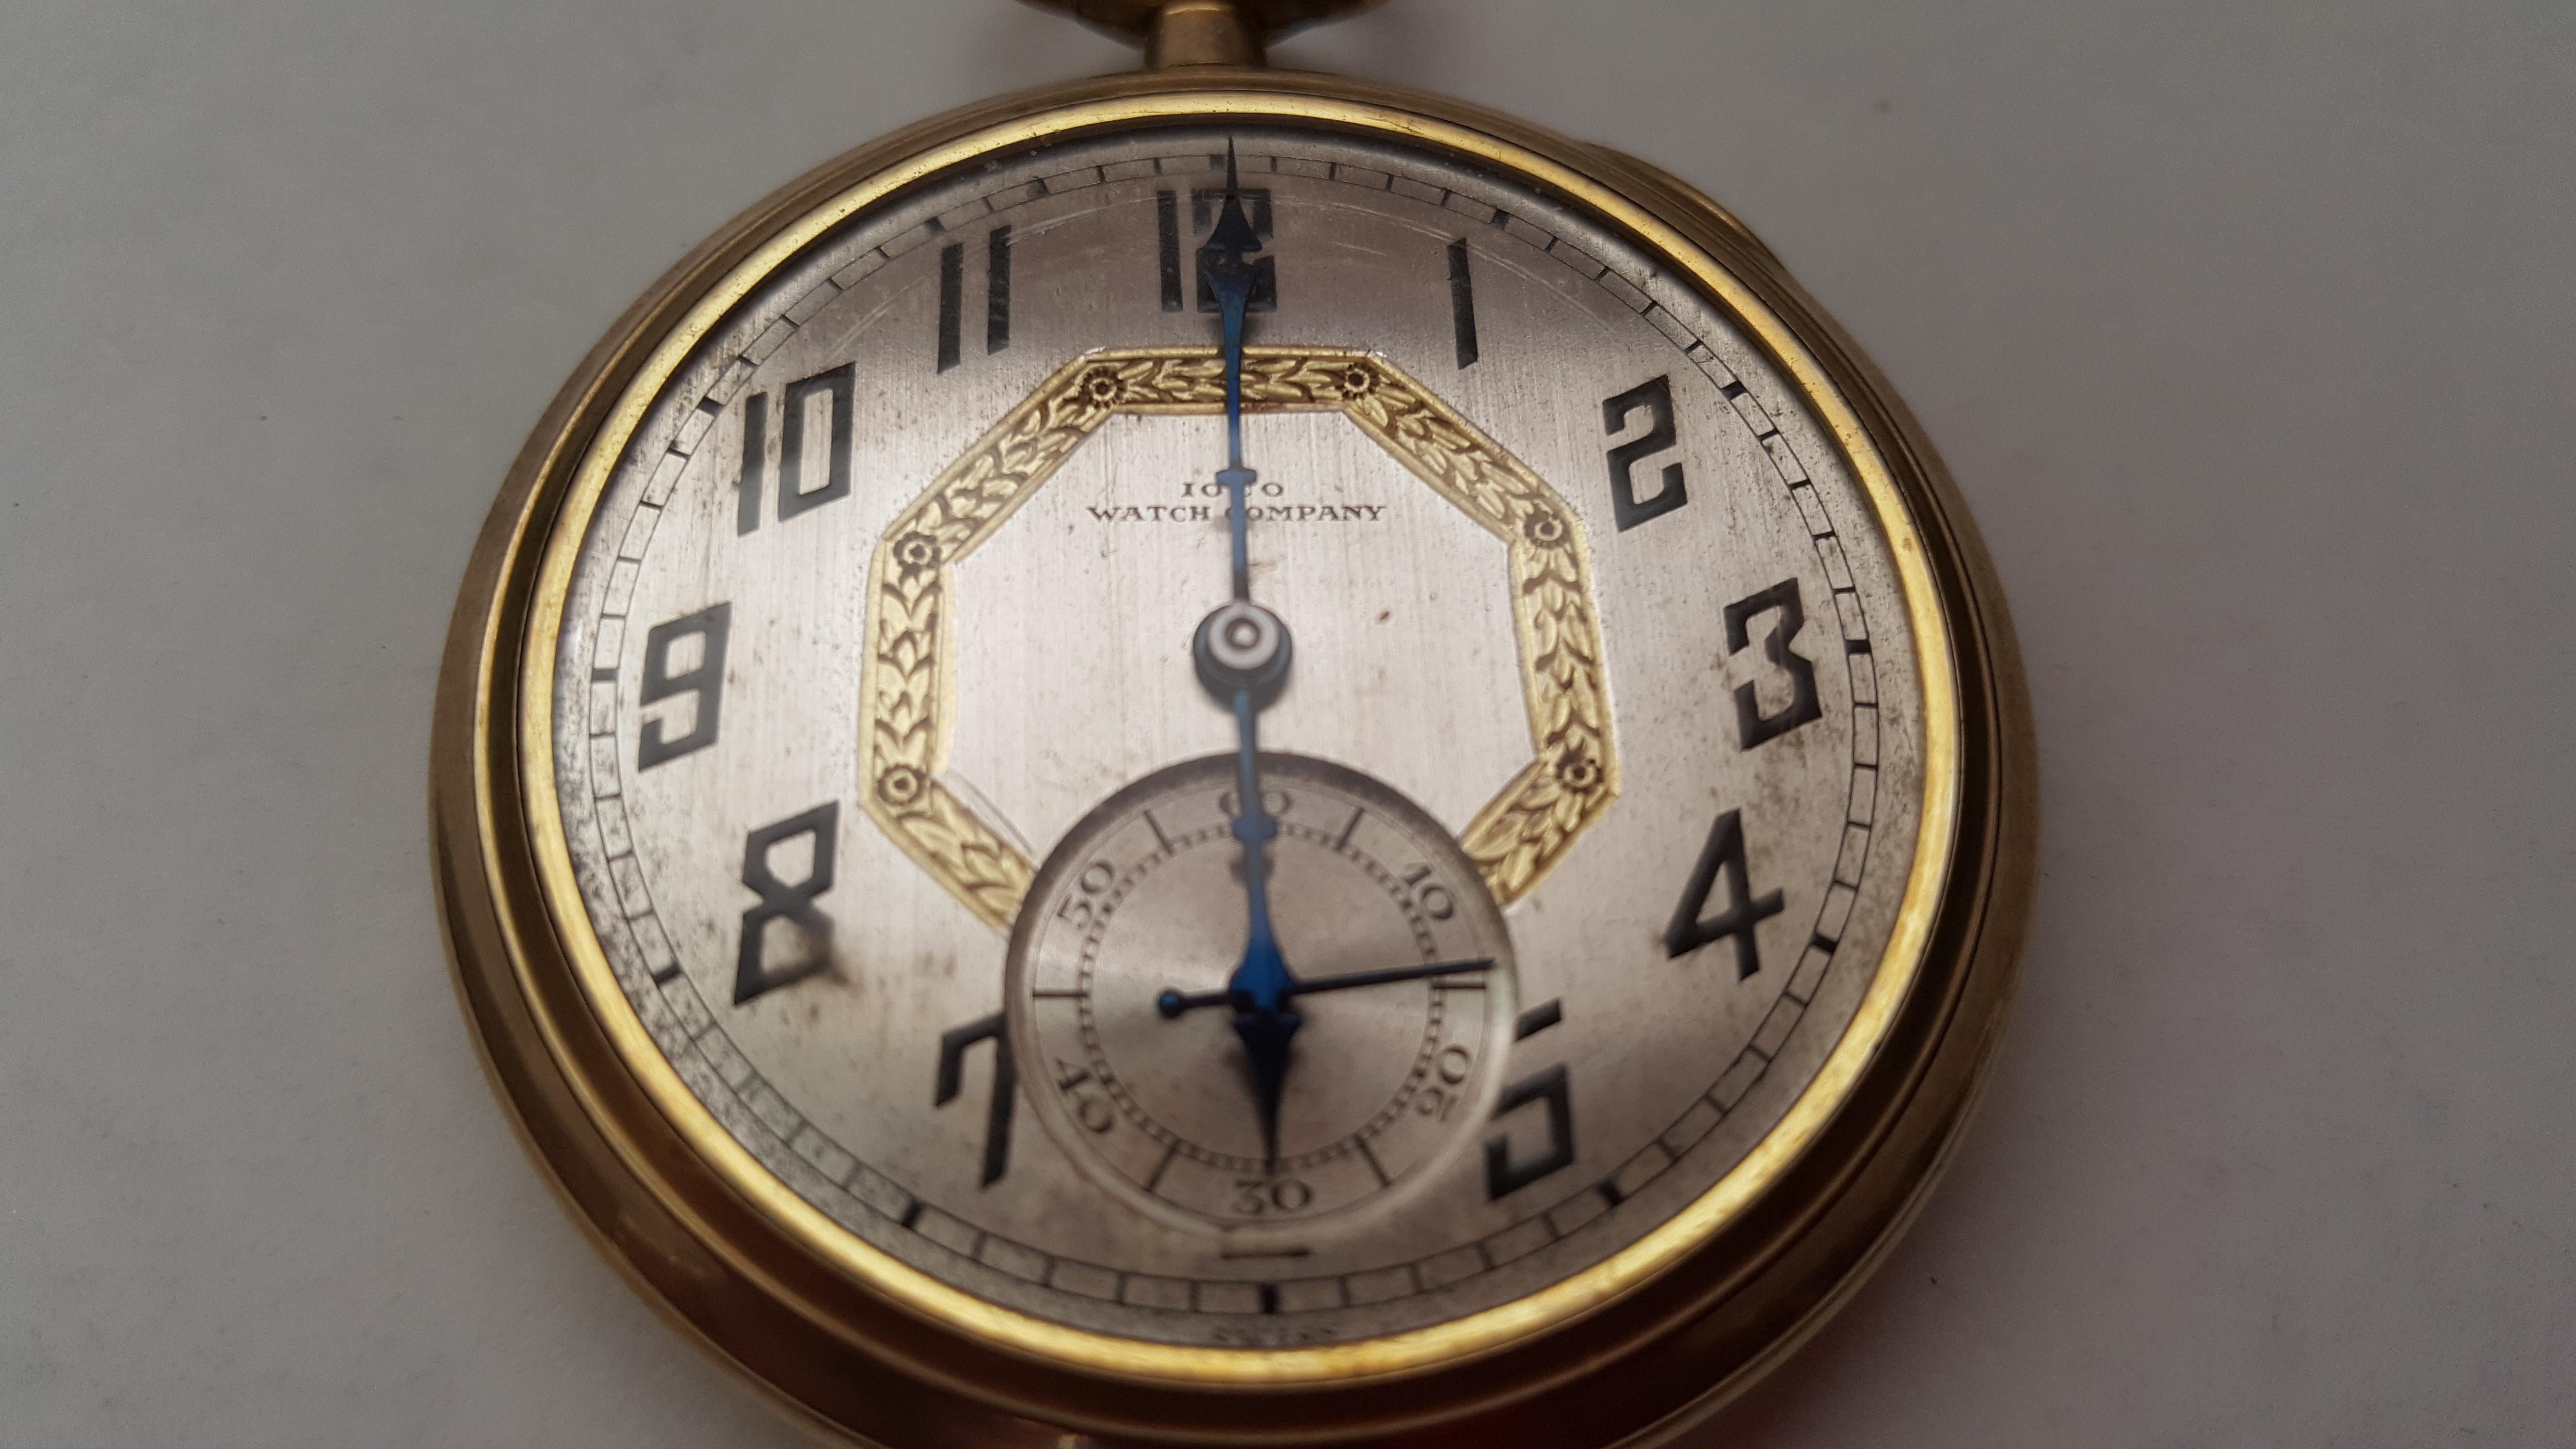 Women's or Men's Vintage Ioco Watch Company Pocket Watch Gold-Plated, White Satin Finish Face